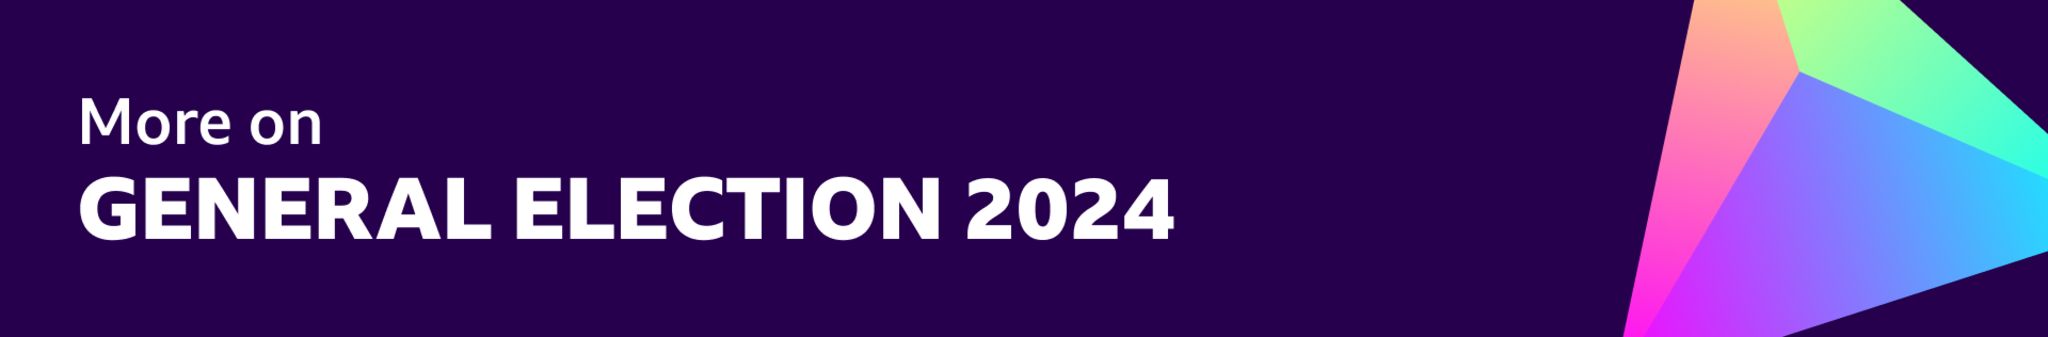 More on General Election 2024 logo